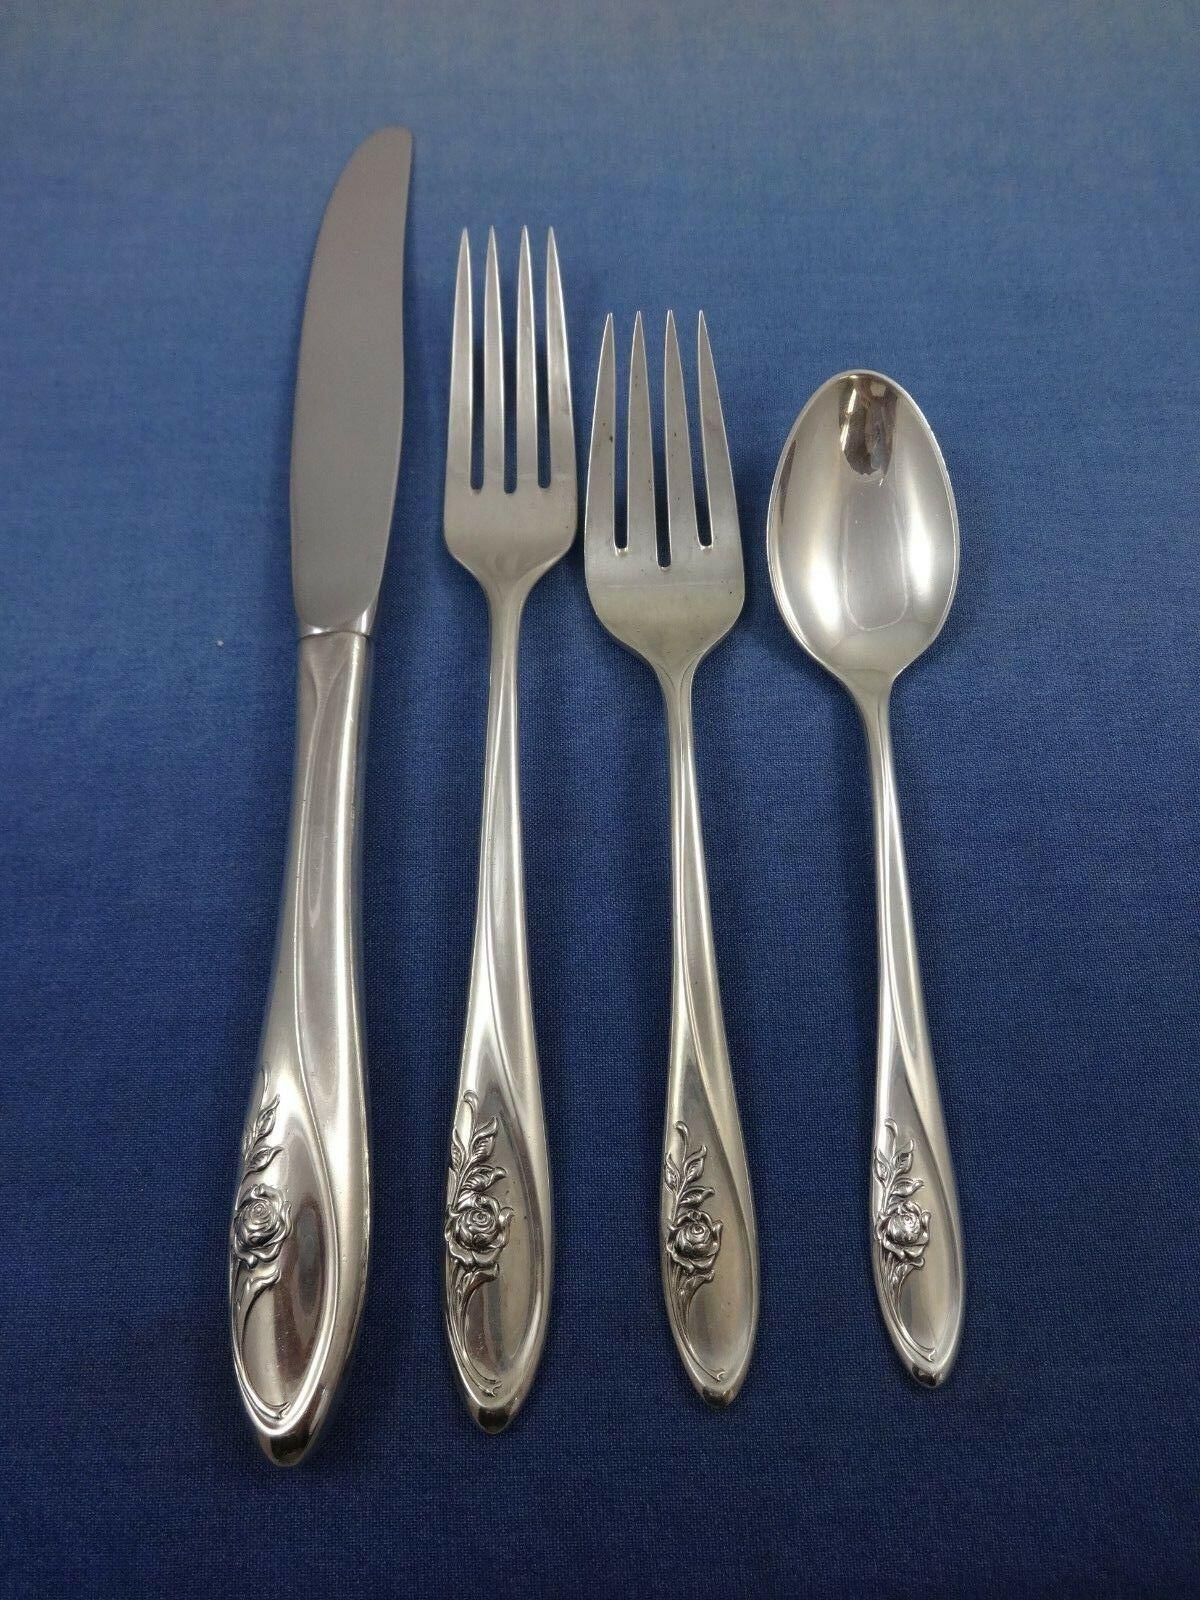 Sculptured Rose by Towle Sterling Silver Flatware Set For 12 Service 65 Pieces In Excellent Condition For Sale In Big Bend, WI